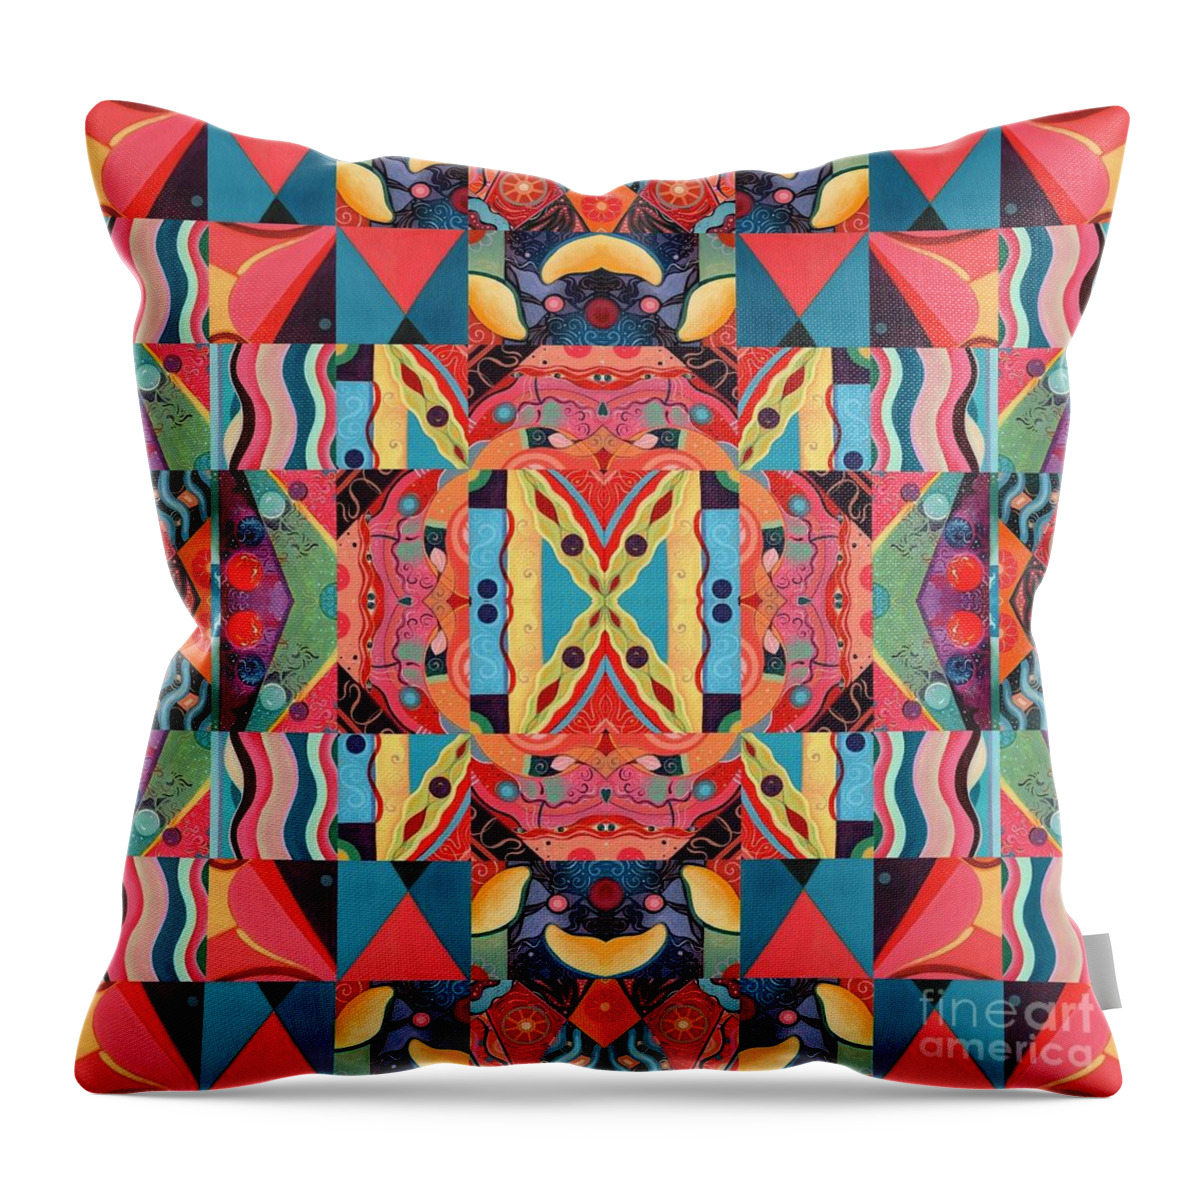 The Joy Of Design Mandala Series Puzzle 8 Arrangement 7 By Helena Tiainen Throw Pillow featuring the painting The Joy of Design Mandala Series Puzzle 8 Arrangement 7 by Helena Tiainen